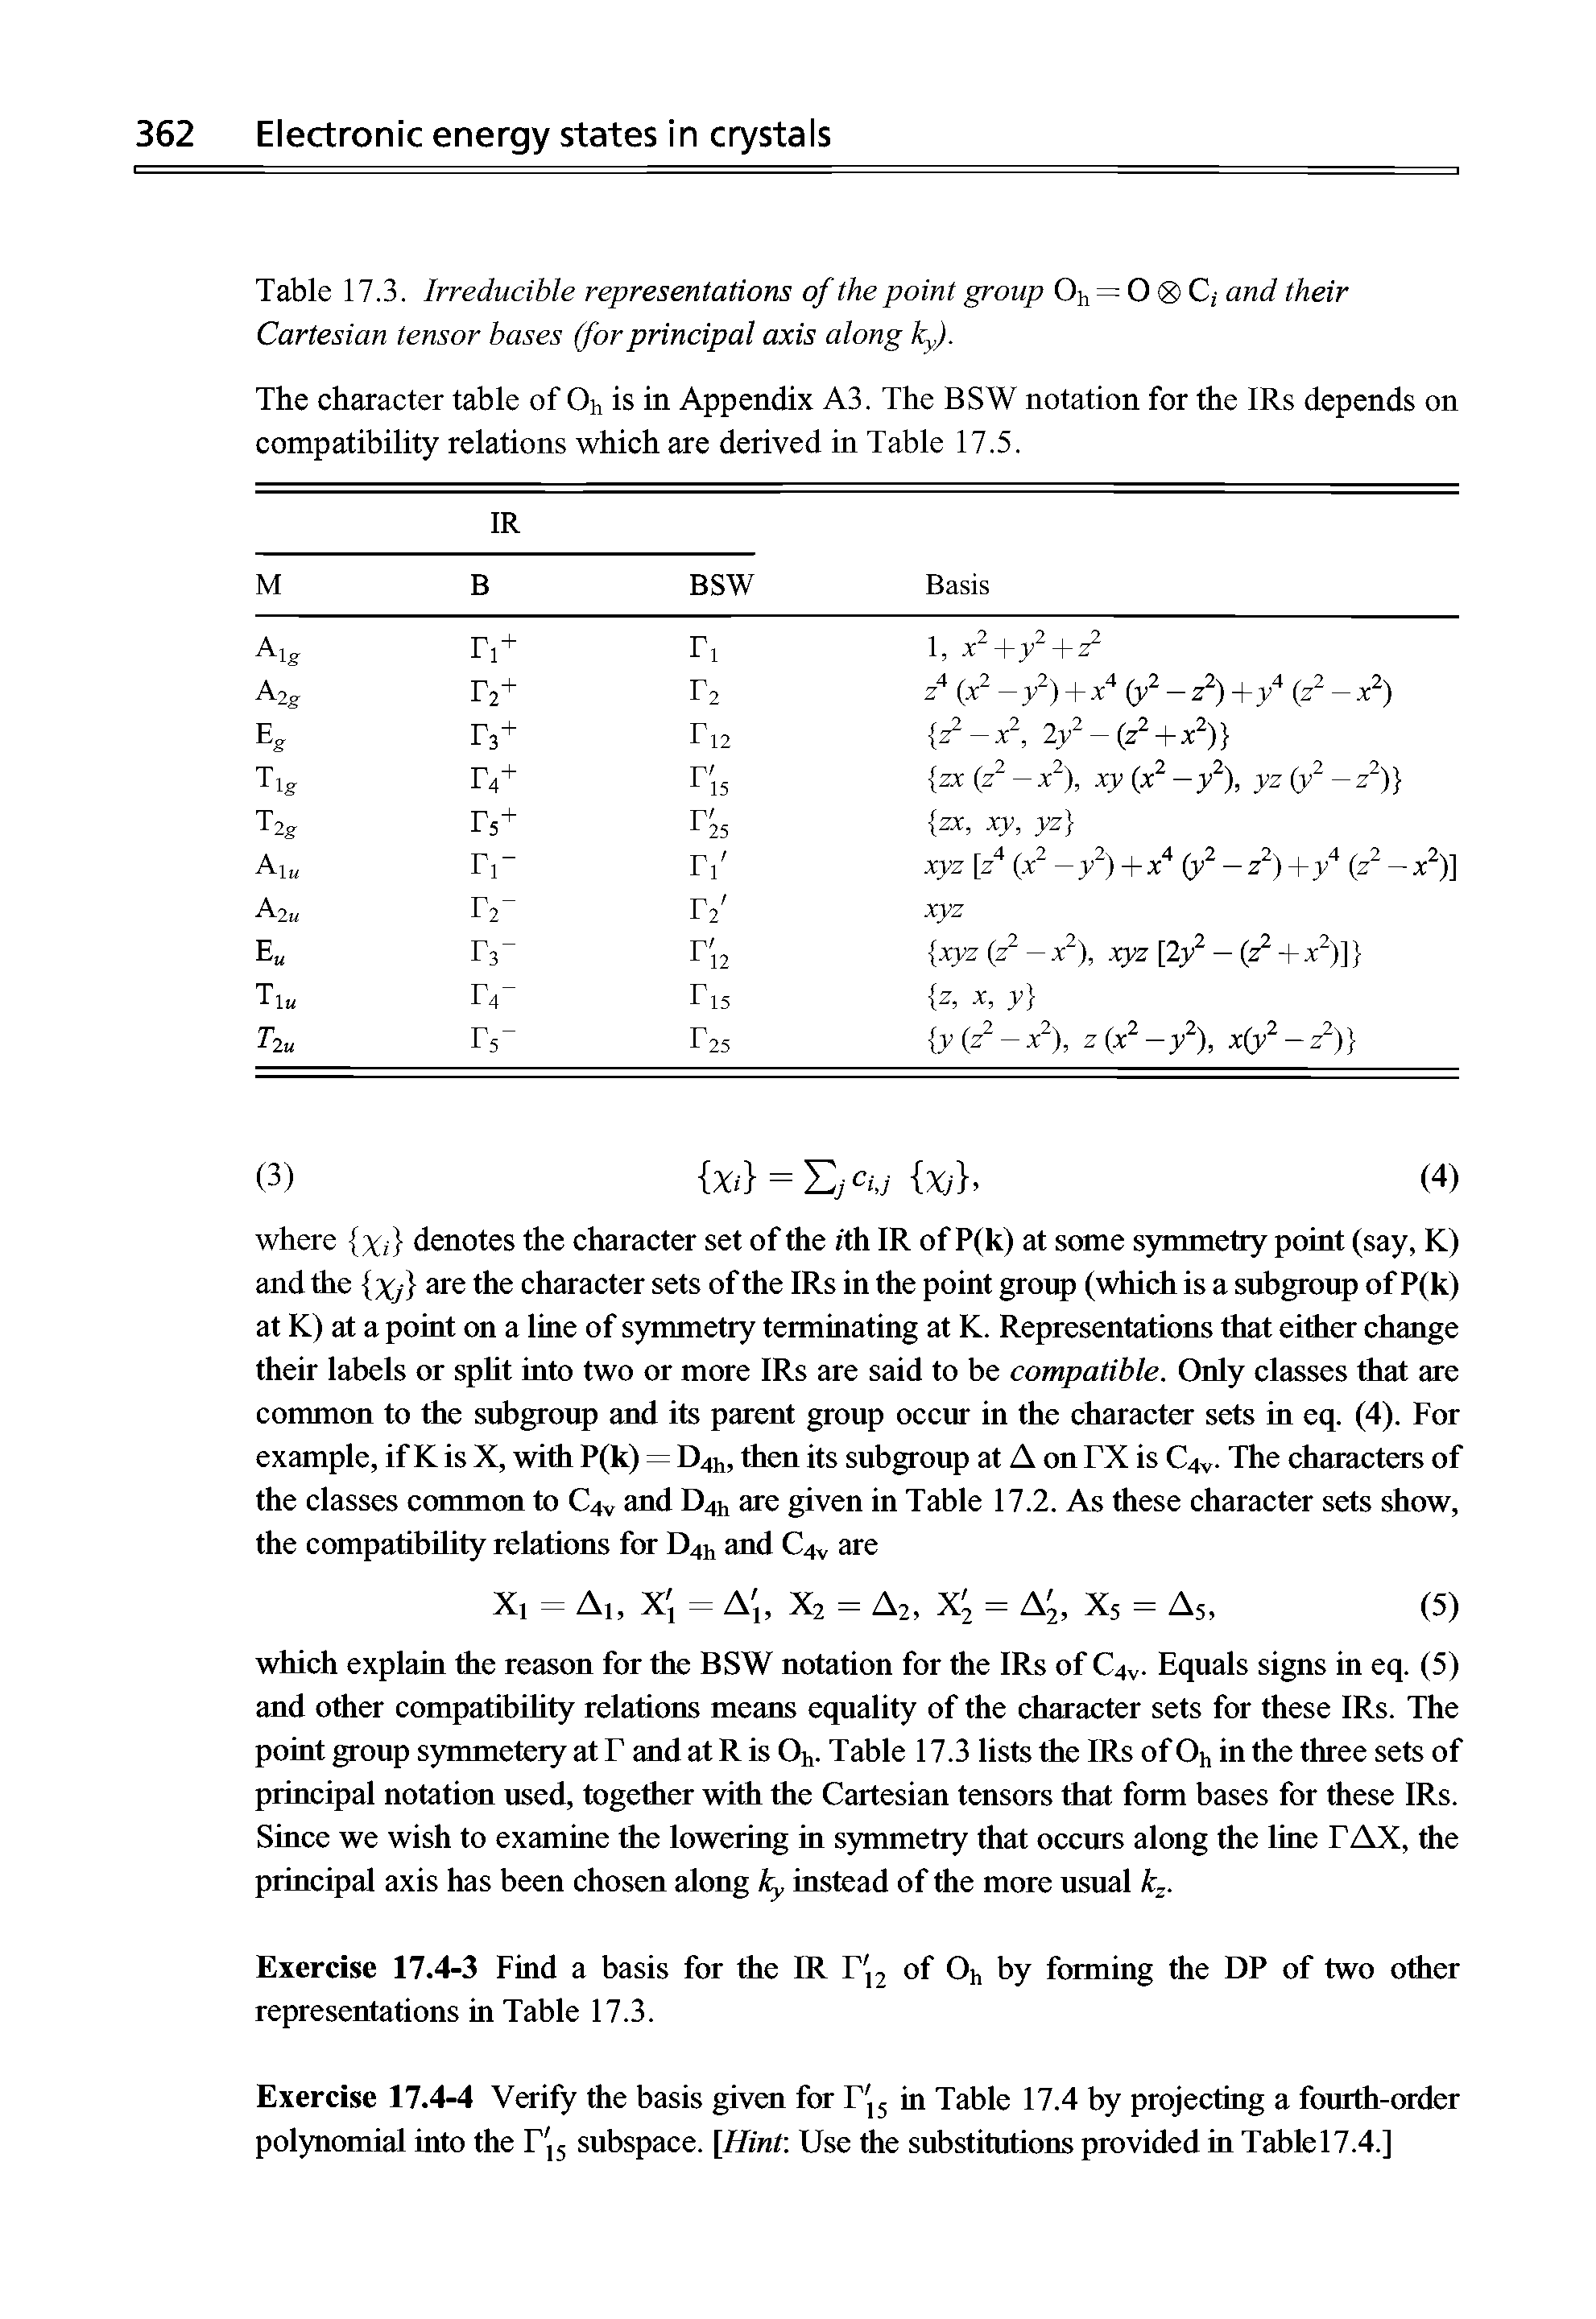 Table 17.3. Irreducible representations of the point group Oh = 0 <8> C, and their Cartesian tensor bases (forprincipal axis along ky).